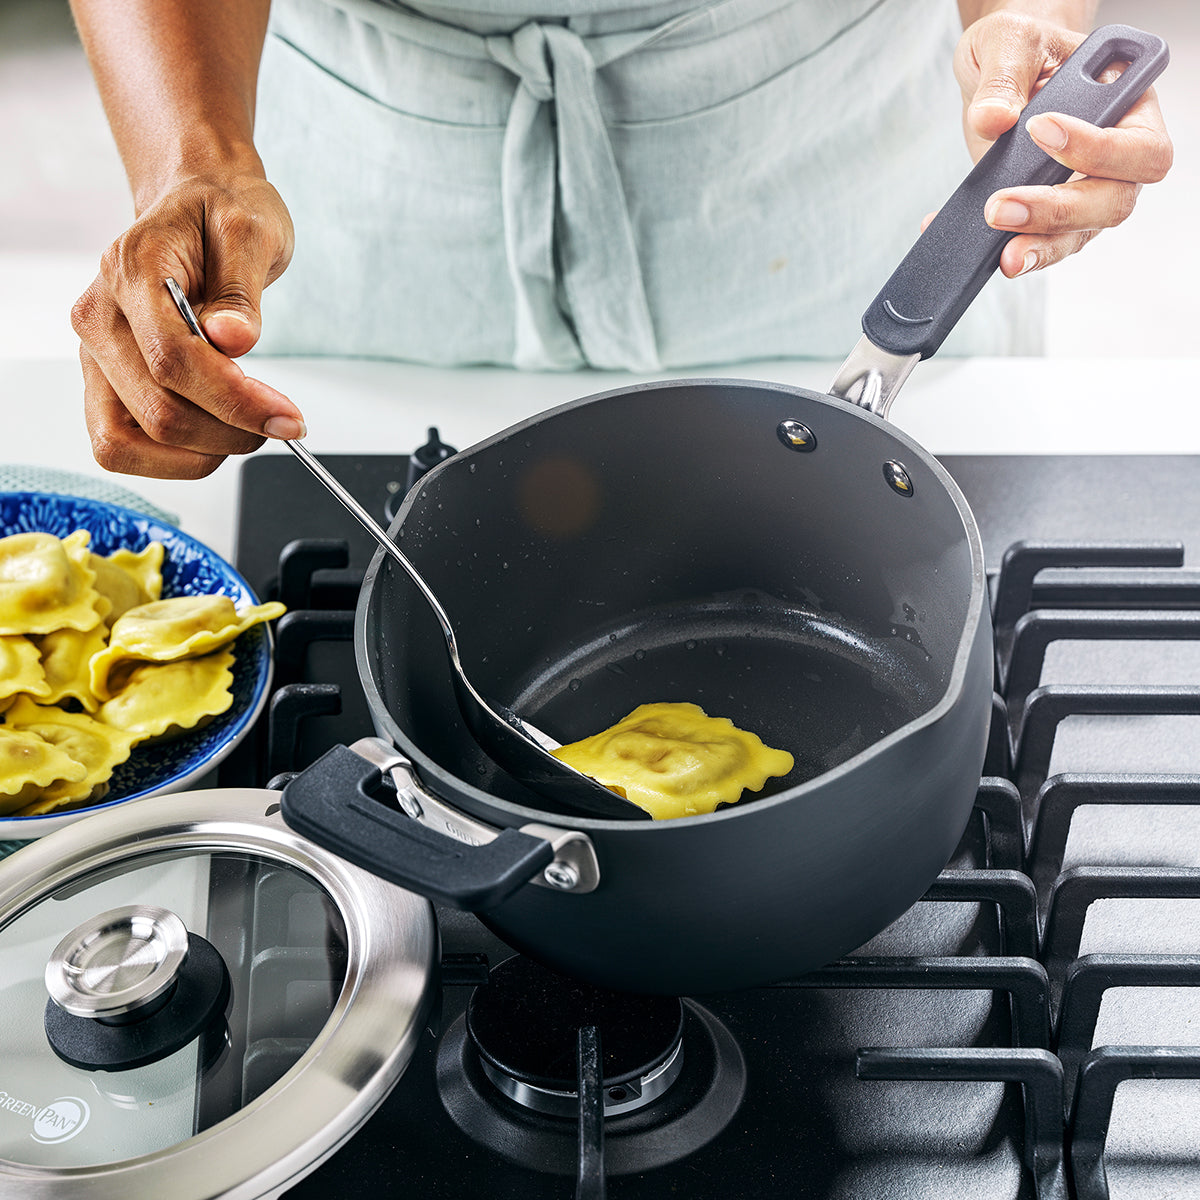 Best Ceramic Induction Cookware - Oh My Veggies